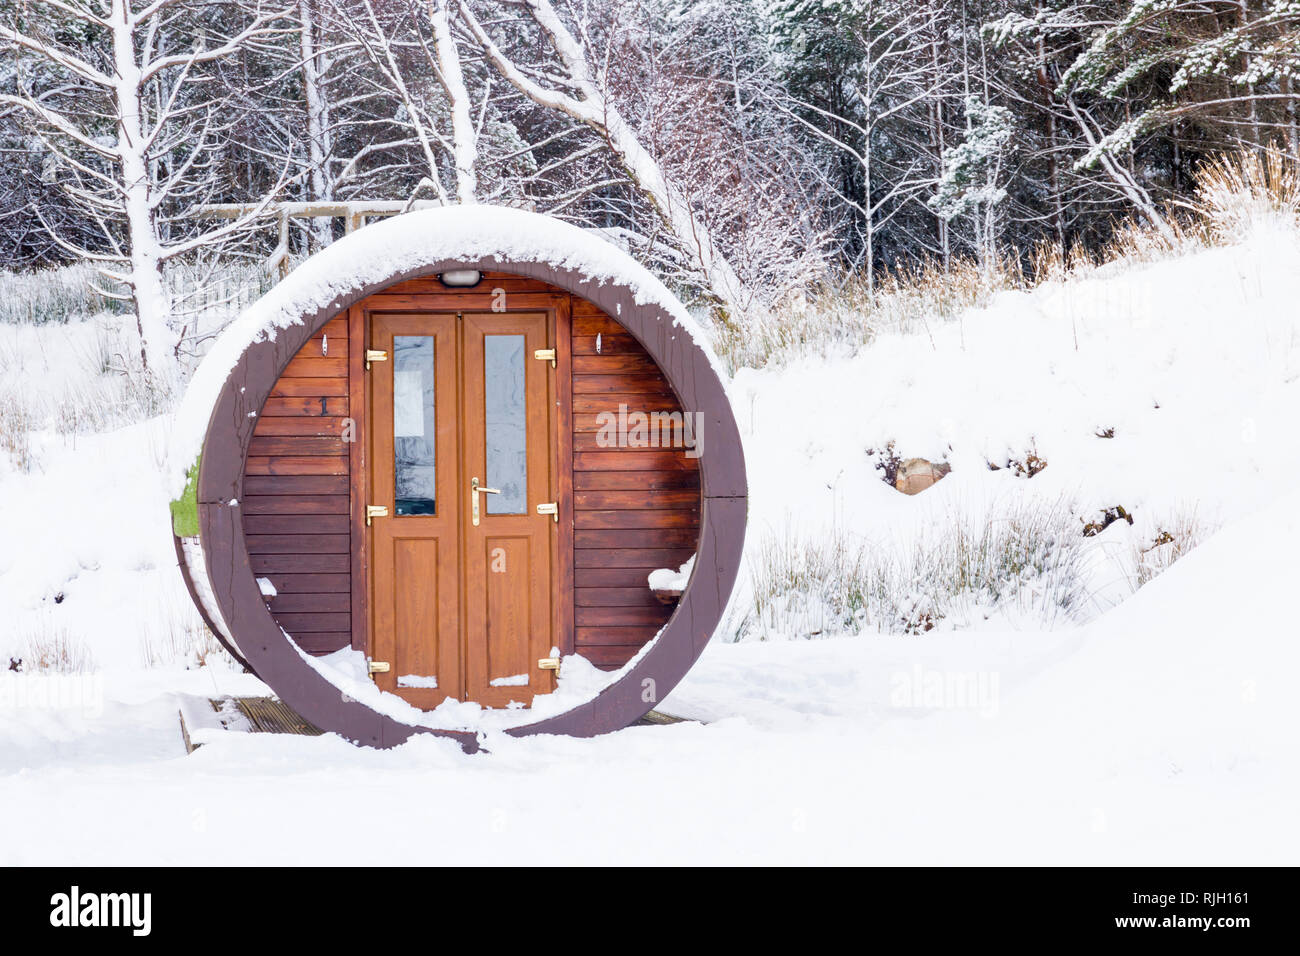 Microlodges accommodation at Glencoe mountain resort at Glencoe, Highlands, Scotland in Winter covered in snow Stock Photo